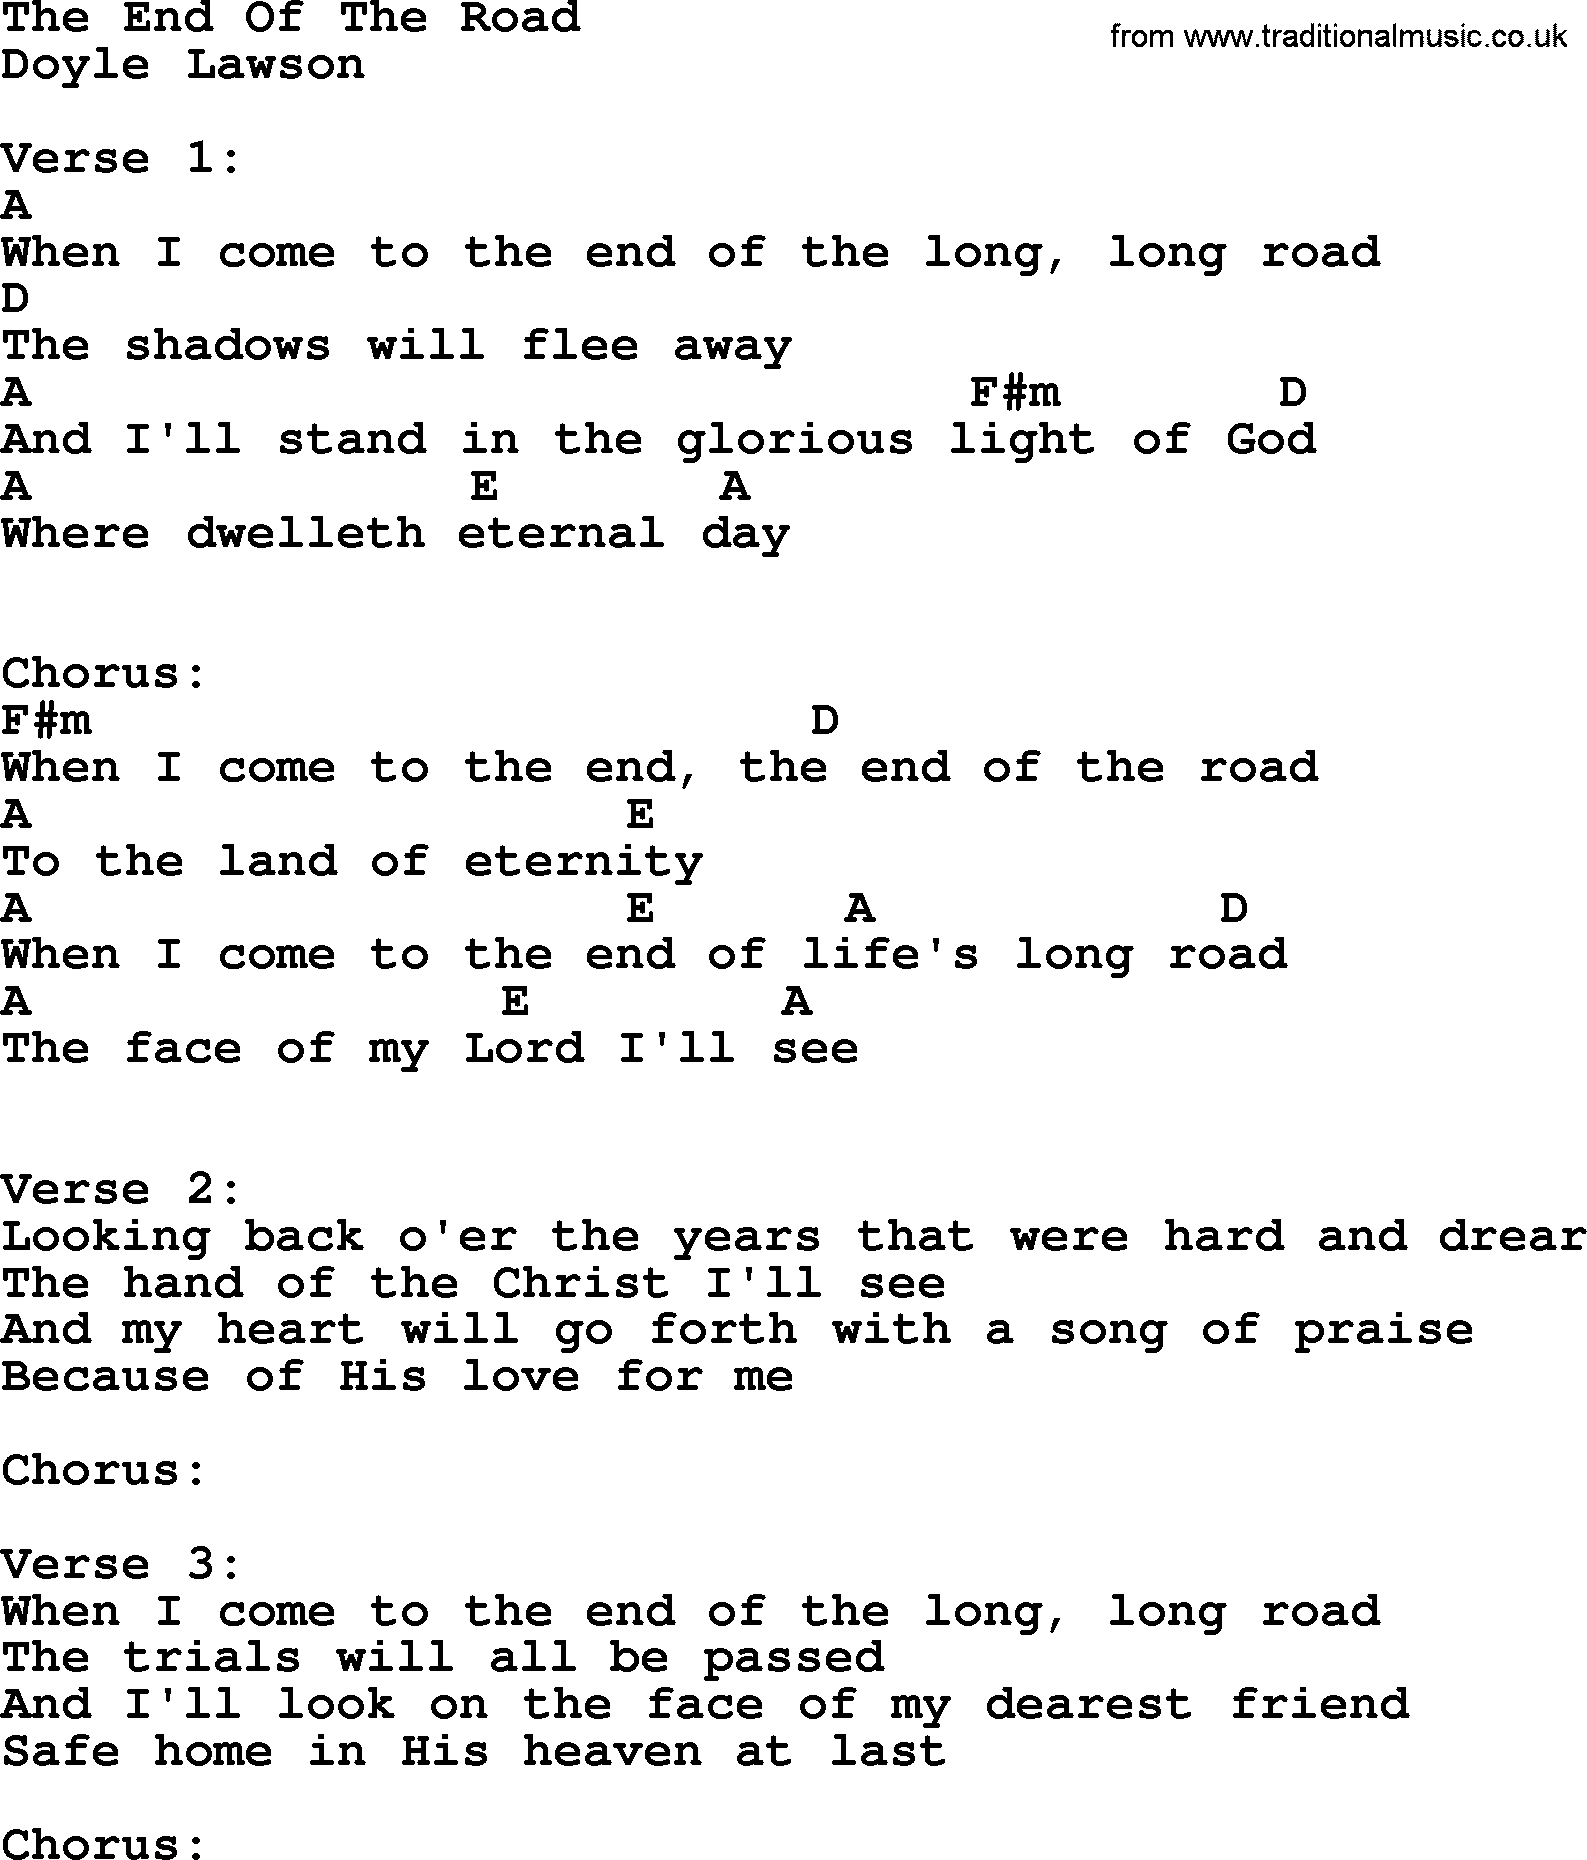 Bluegrass song: The End Of The Road, lyrics and chords